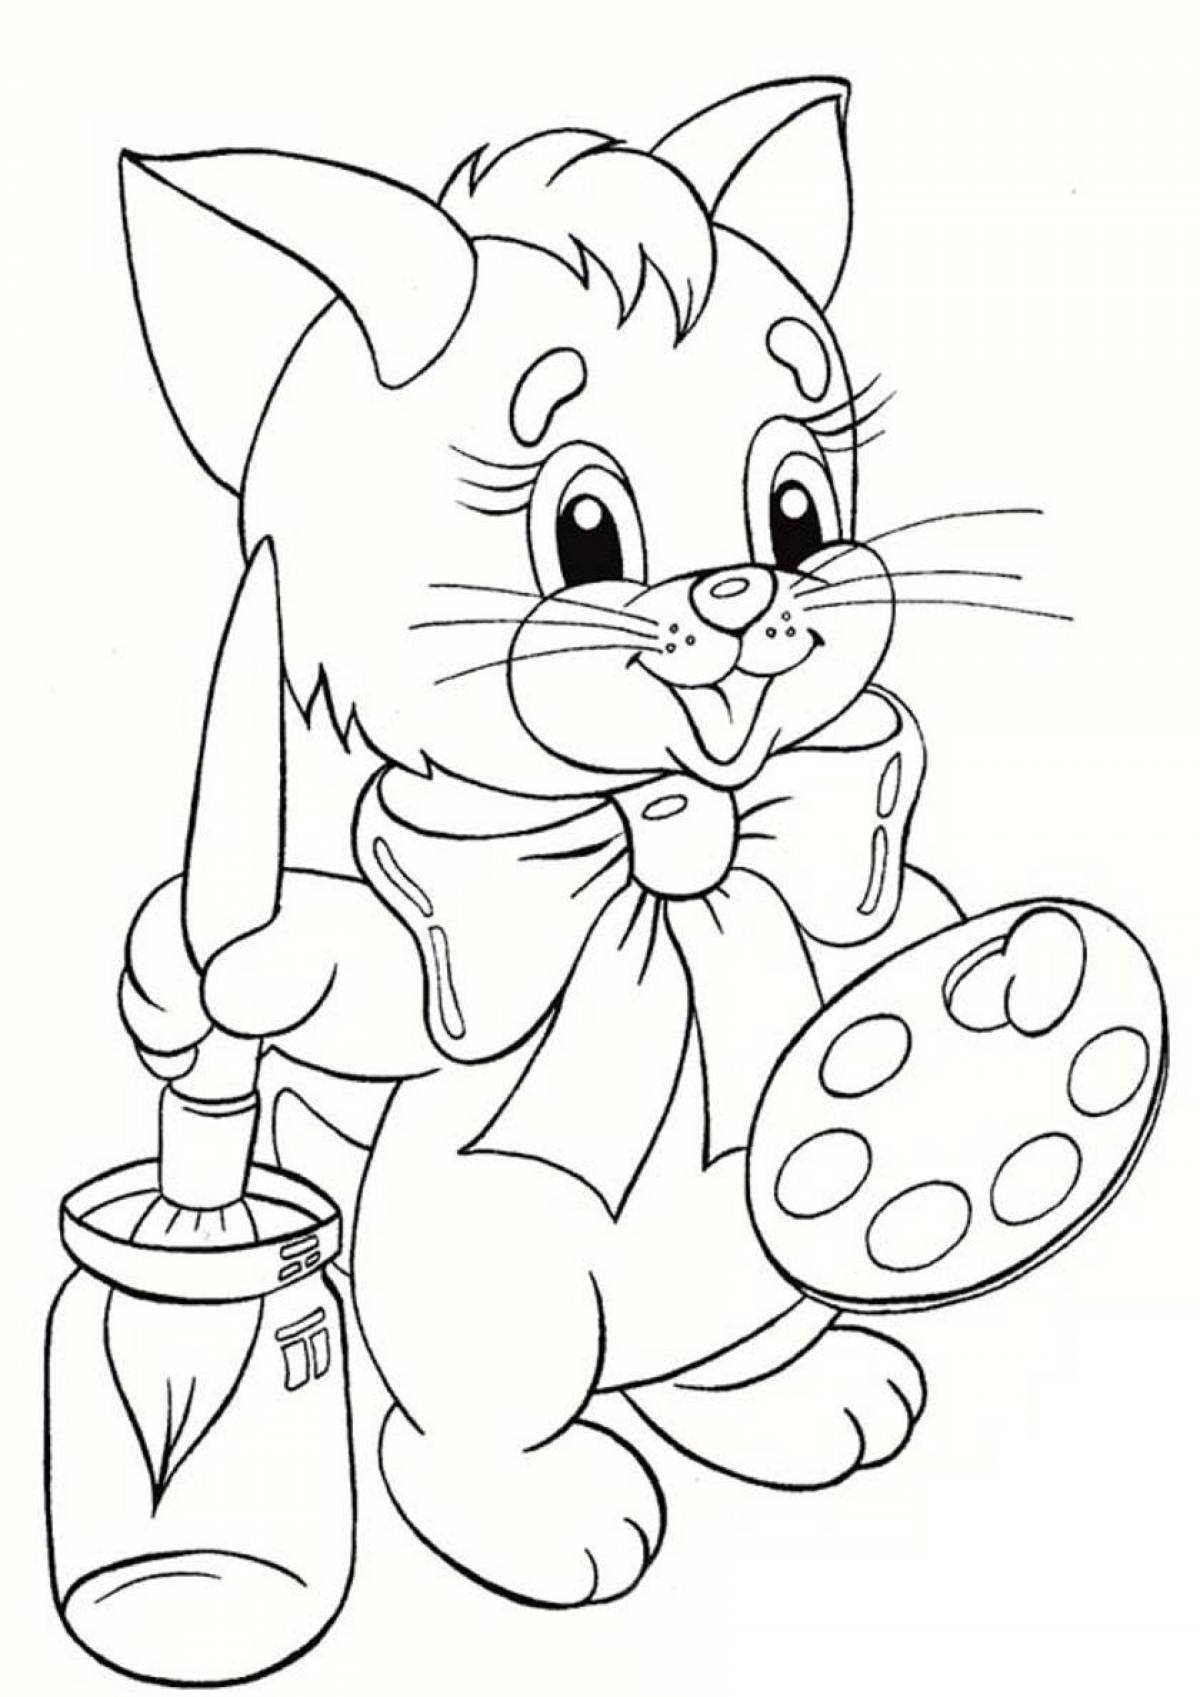 Cute kitten coloring book for 4-5 year olds